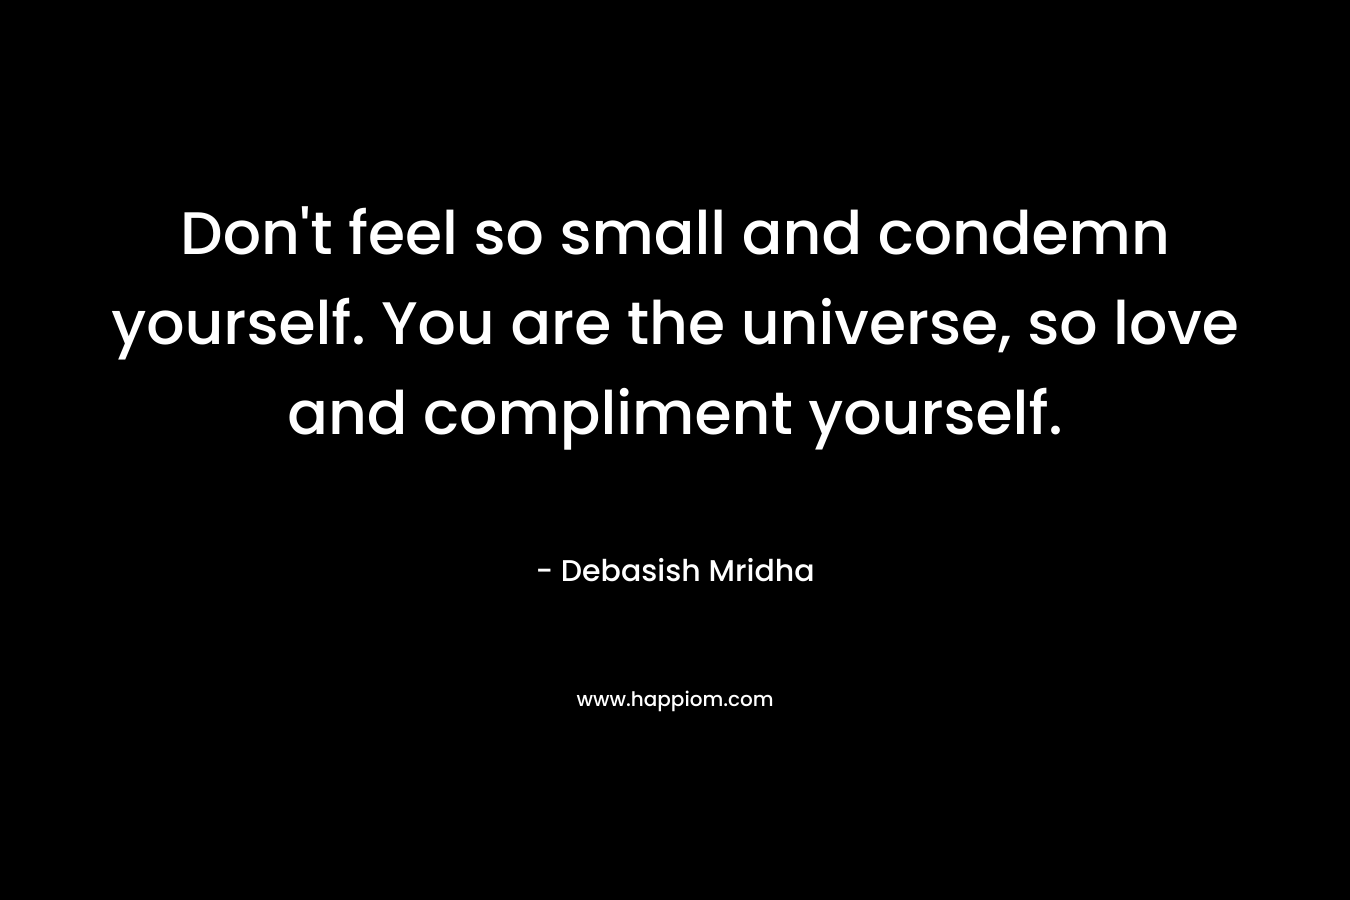 Don't feel so small and condemn yourself. You are the universe, so love and compliment yourself.